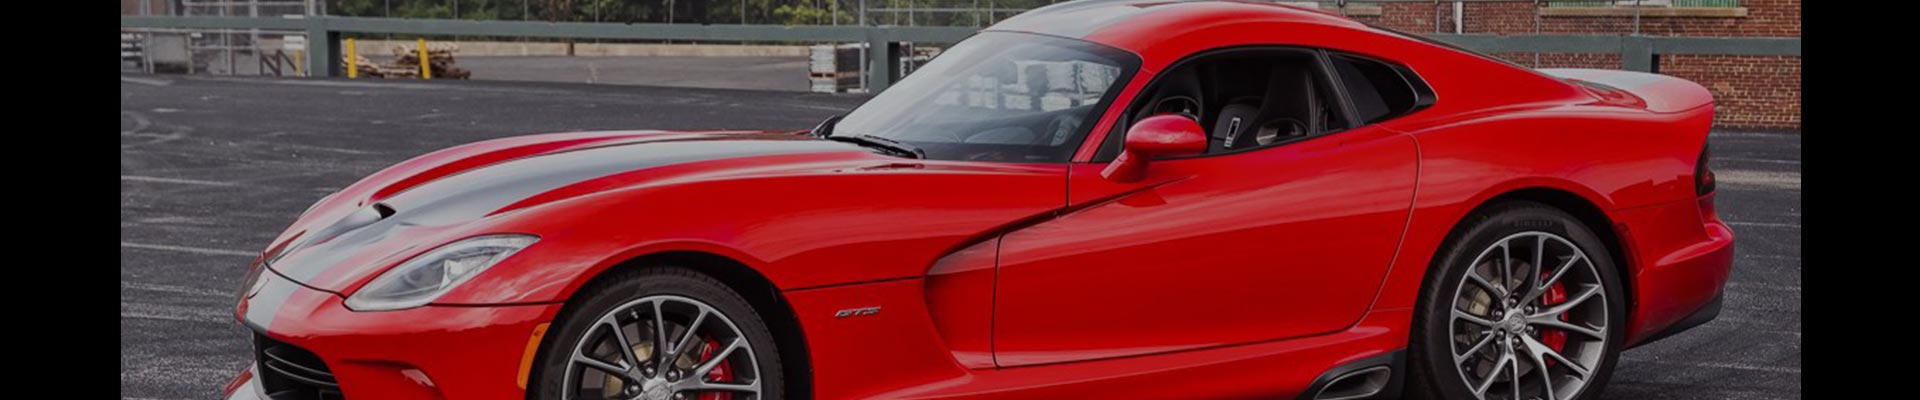 Shop Replacement and OEM Dodge Viper Parts with Discounted Price on the Net